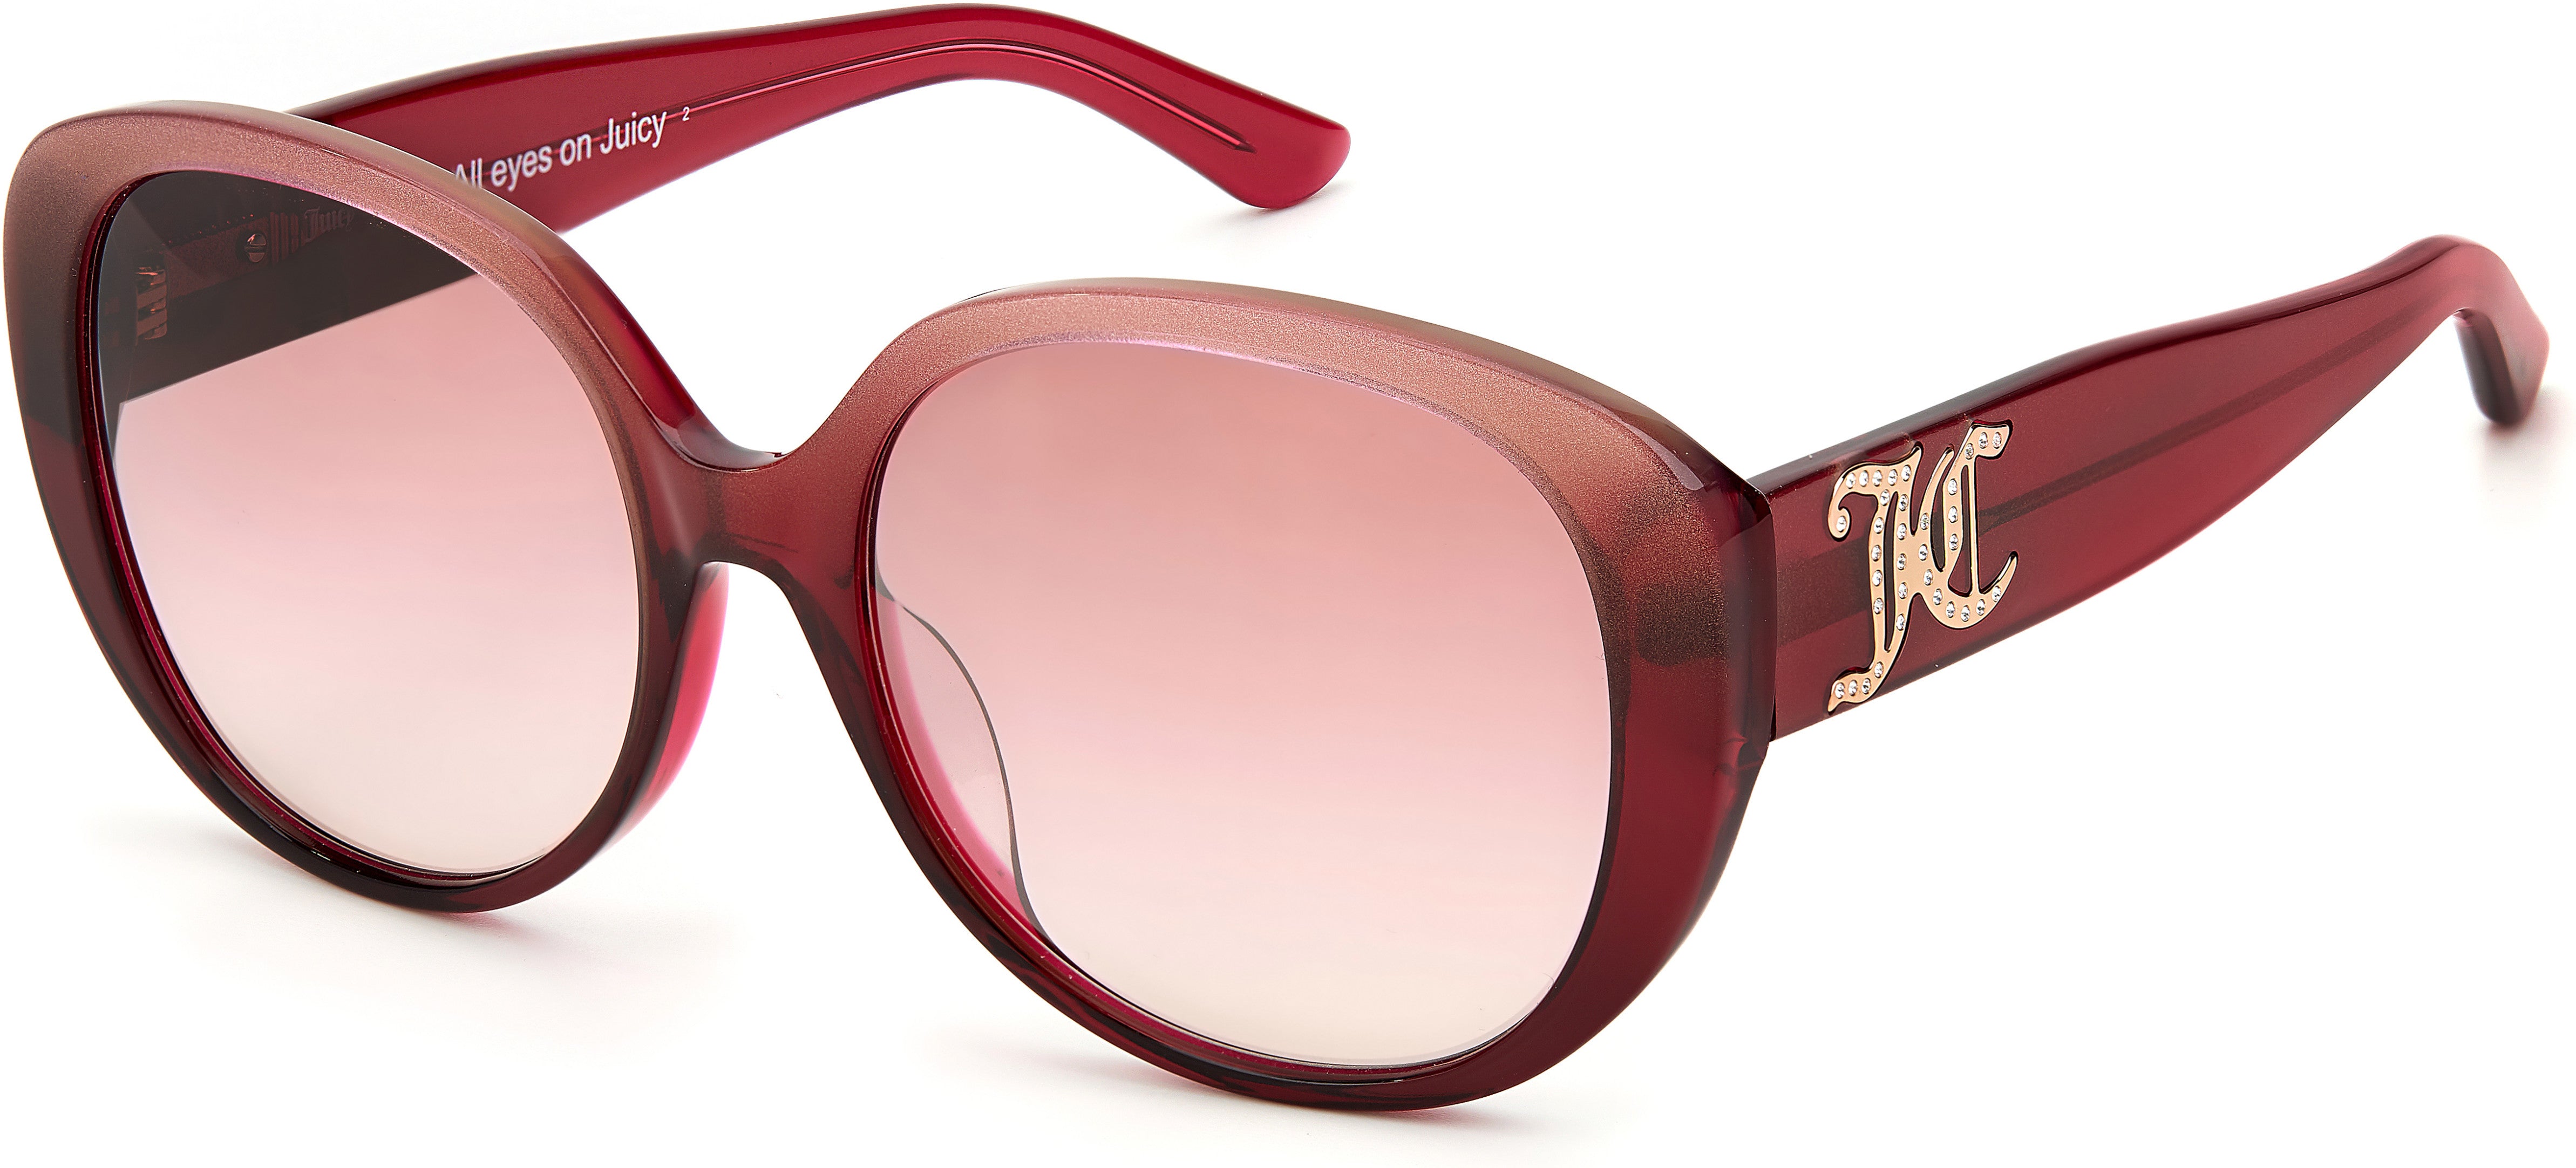 Juicy Couture Juicy 614/S Oval Modified Sunglasses 0W66-0W66  Pink Glitter (2S Pink Flash Silver)